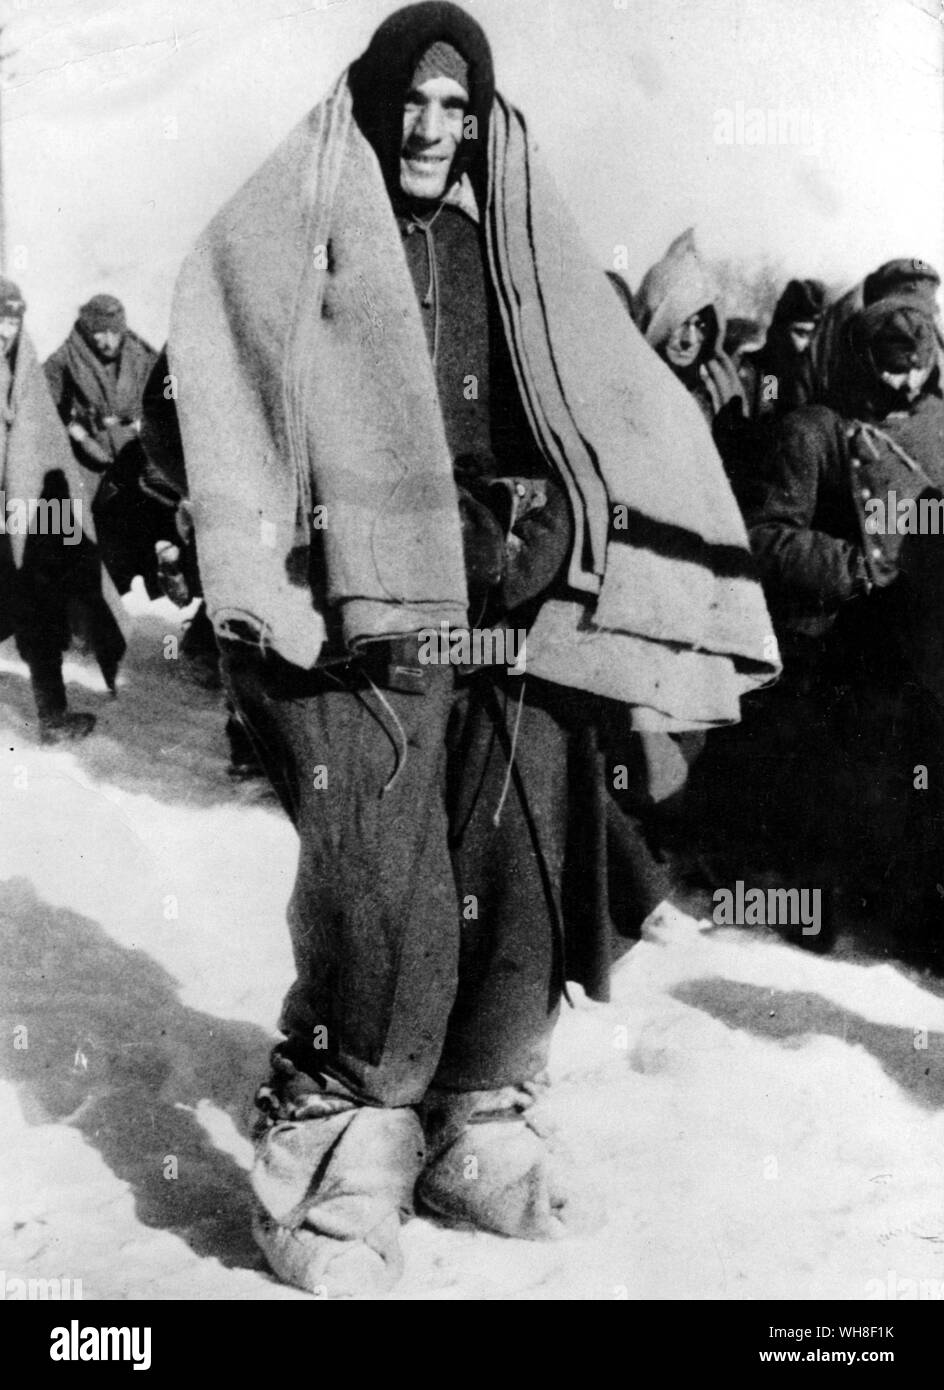 A captured German soldier muffled up in blankets in an endeavour to keep warm in the bitter Russian winter. World War II, 1939-1945. Stock Photo